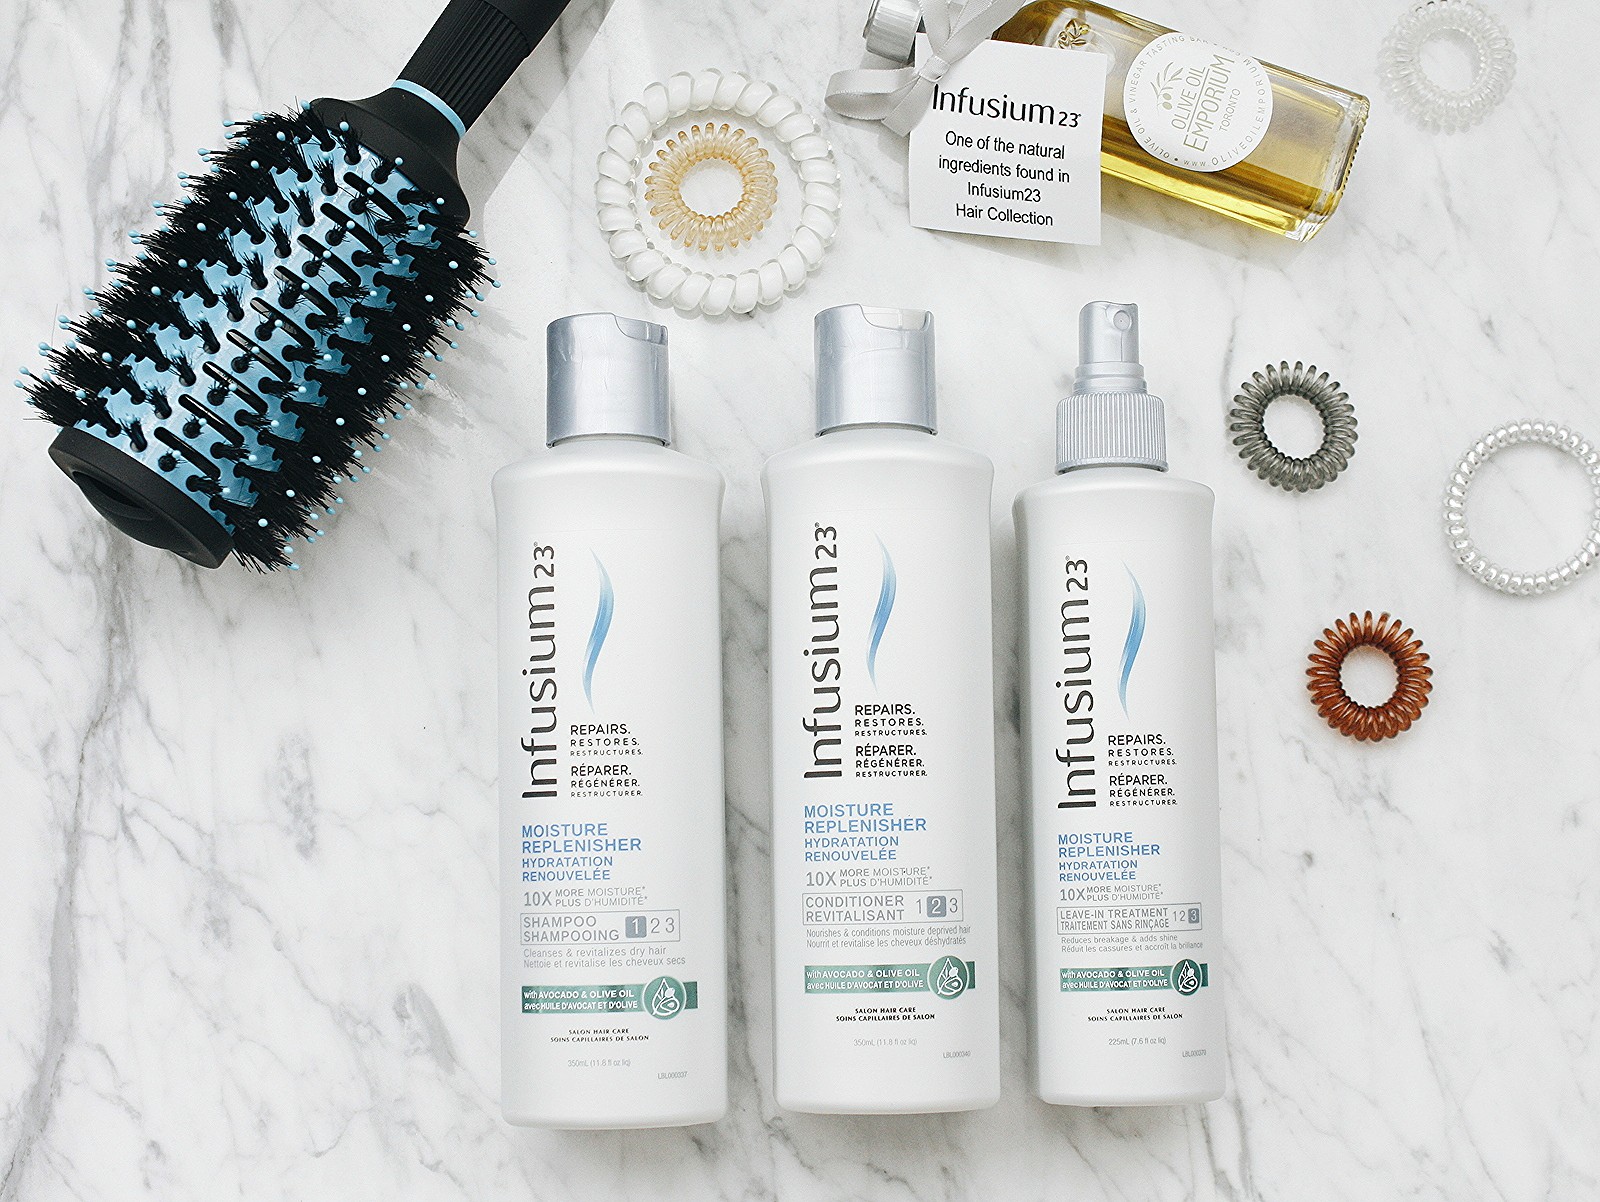 SUMMER HAIR WITH INFUSIUM23 MOISTURE REPLENISHER LINE